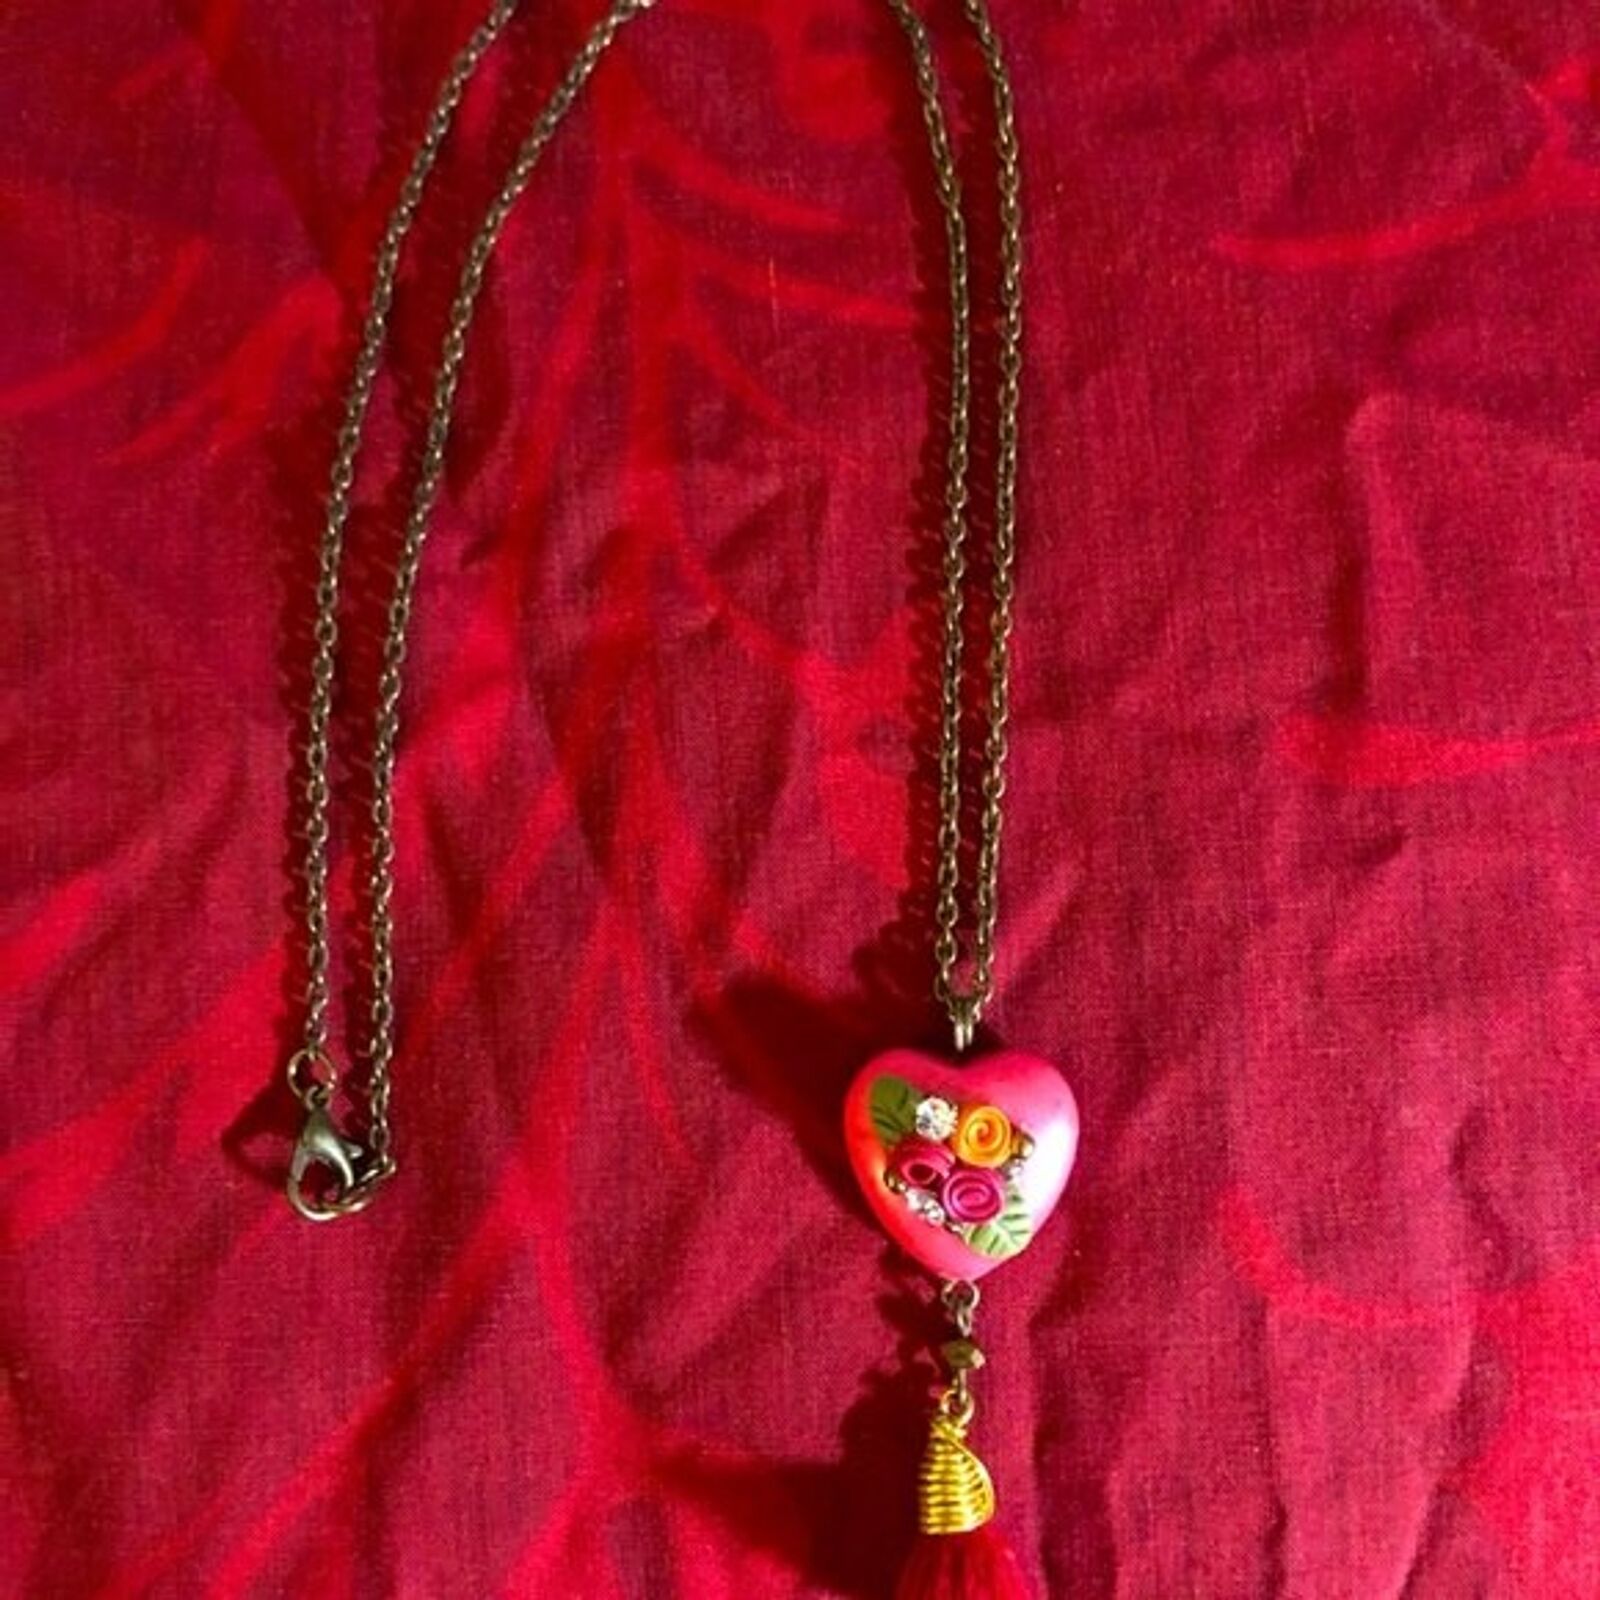 Vintage Heart W/rose Embellishments Necklace, Preteen, Girl Bling, Sweetheart